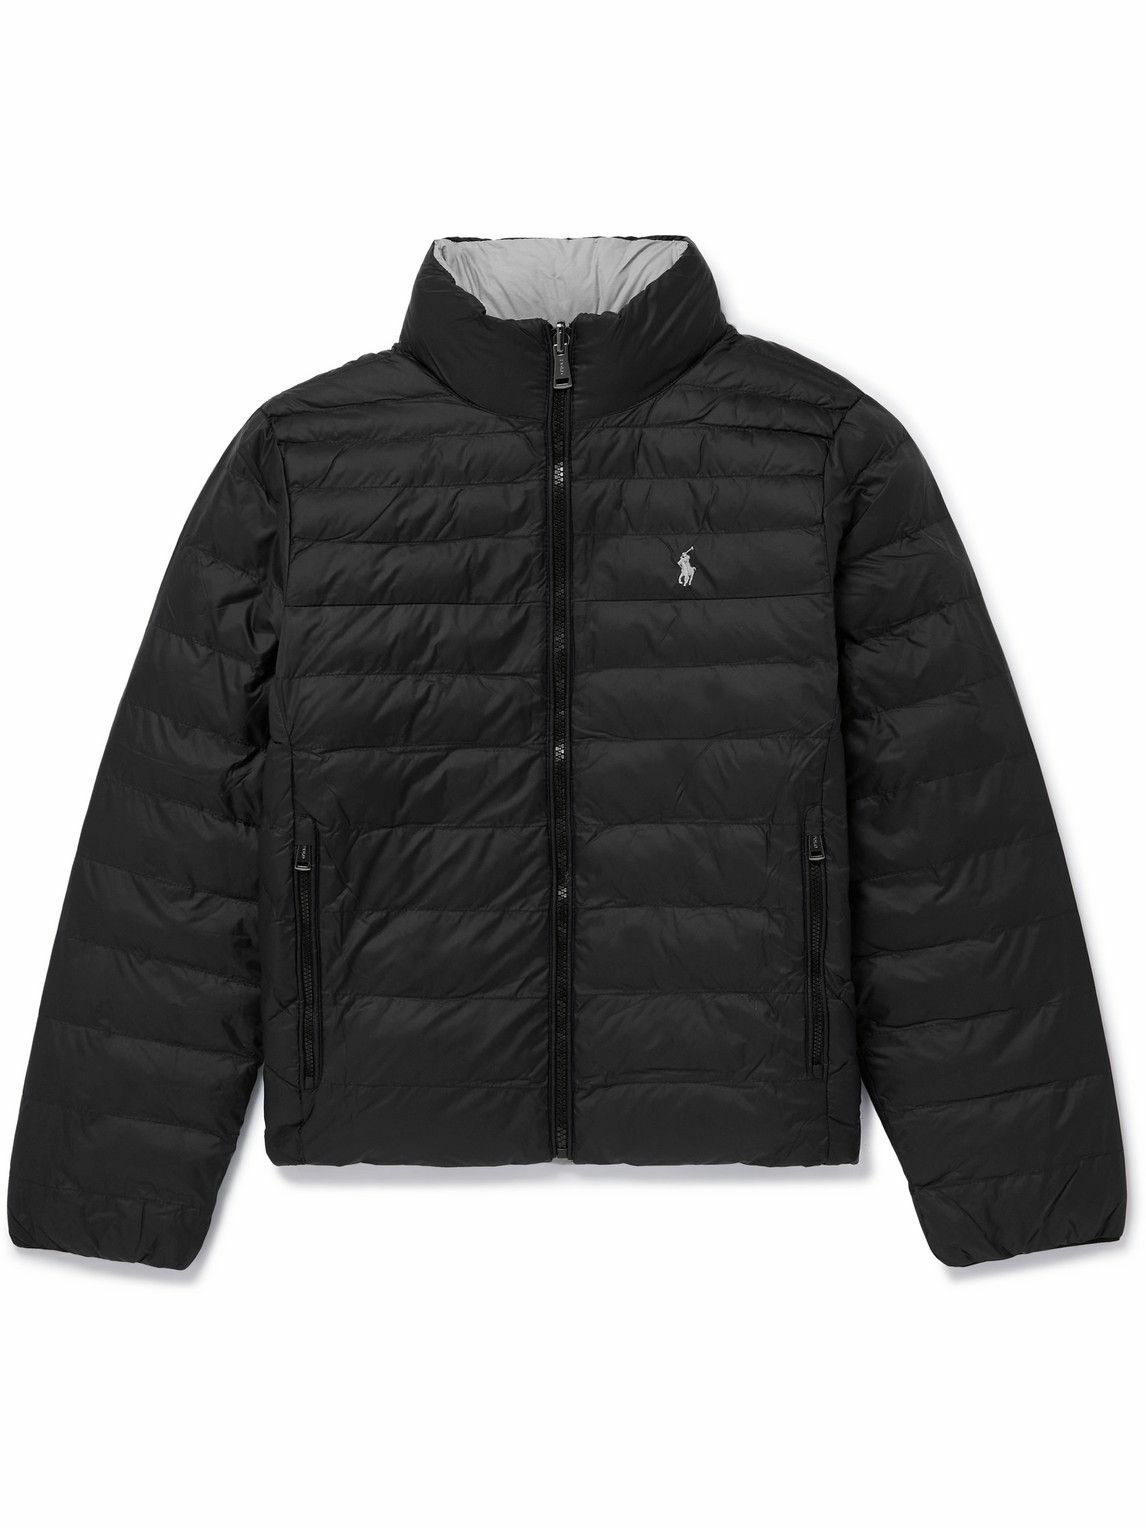 Polo Ralph Lauren Kids - Reversible Quilted Shell Jacket - Black